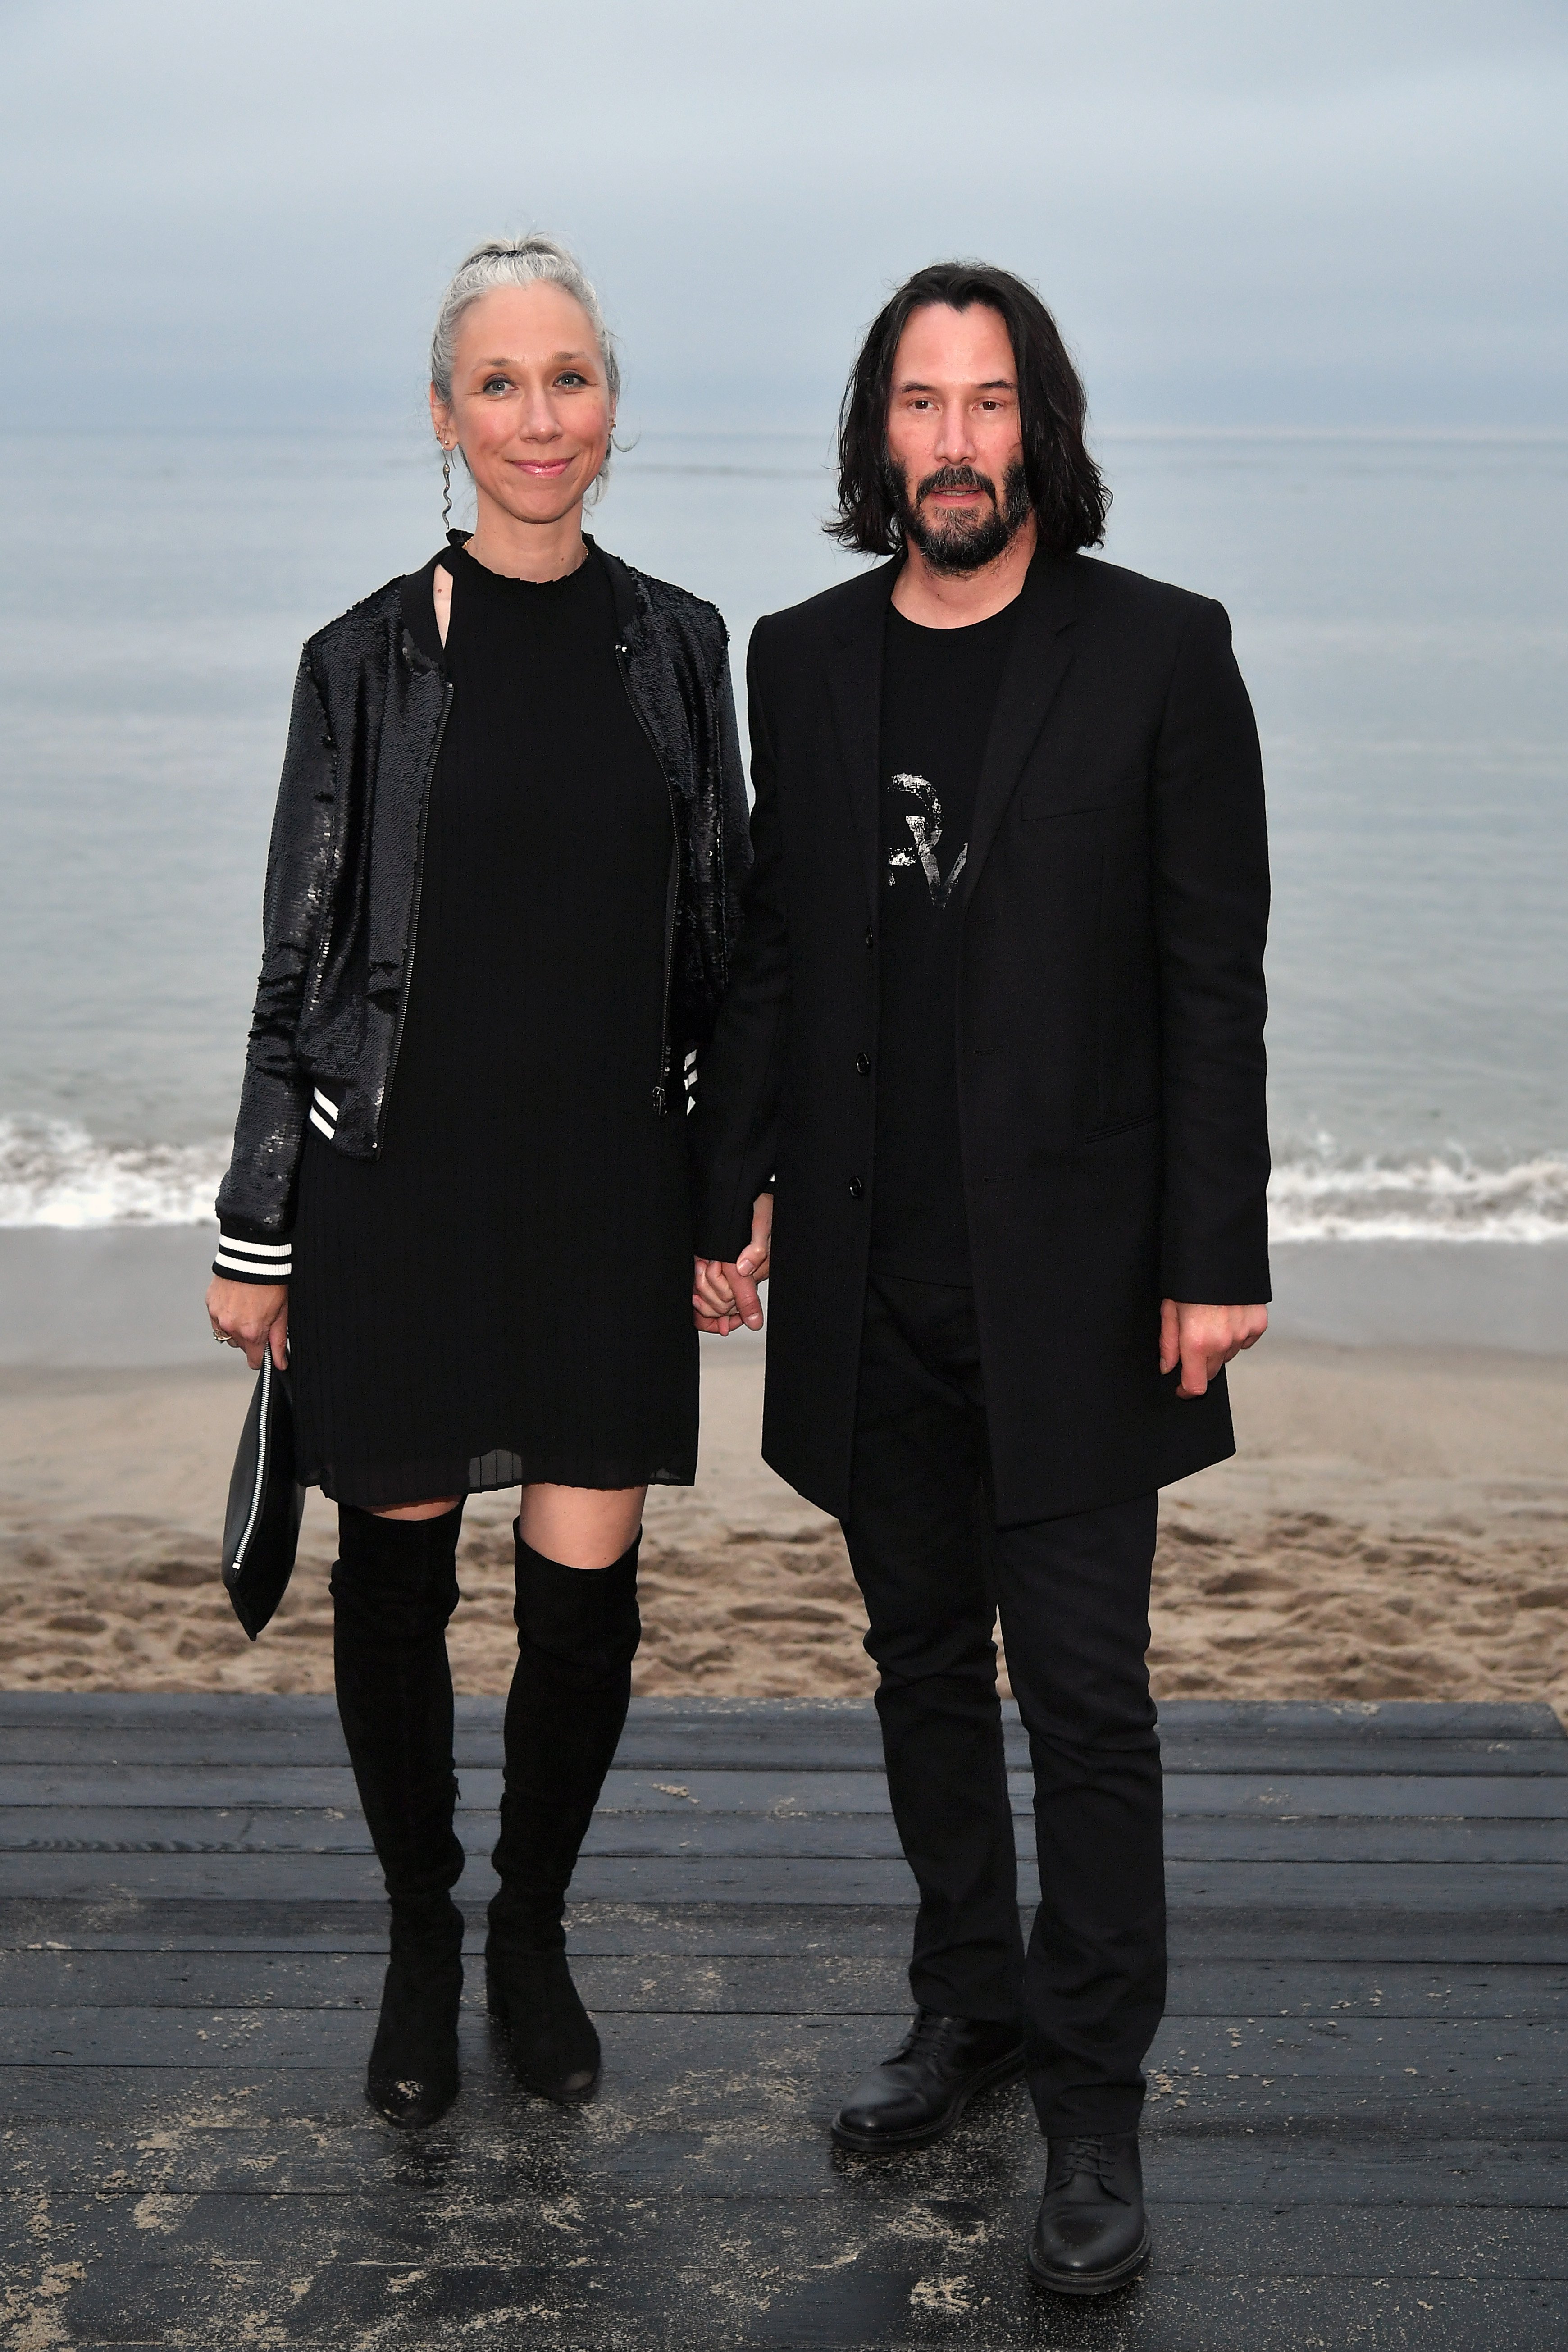 Keanu Reeves and Alexandra Grant attend Saint Laurent's Malibu Fashion Show in June 2019 | Photo: Getty Images